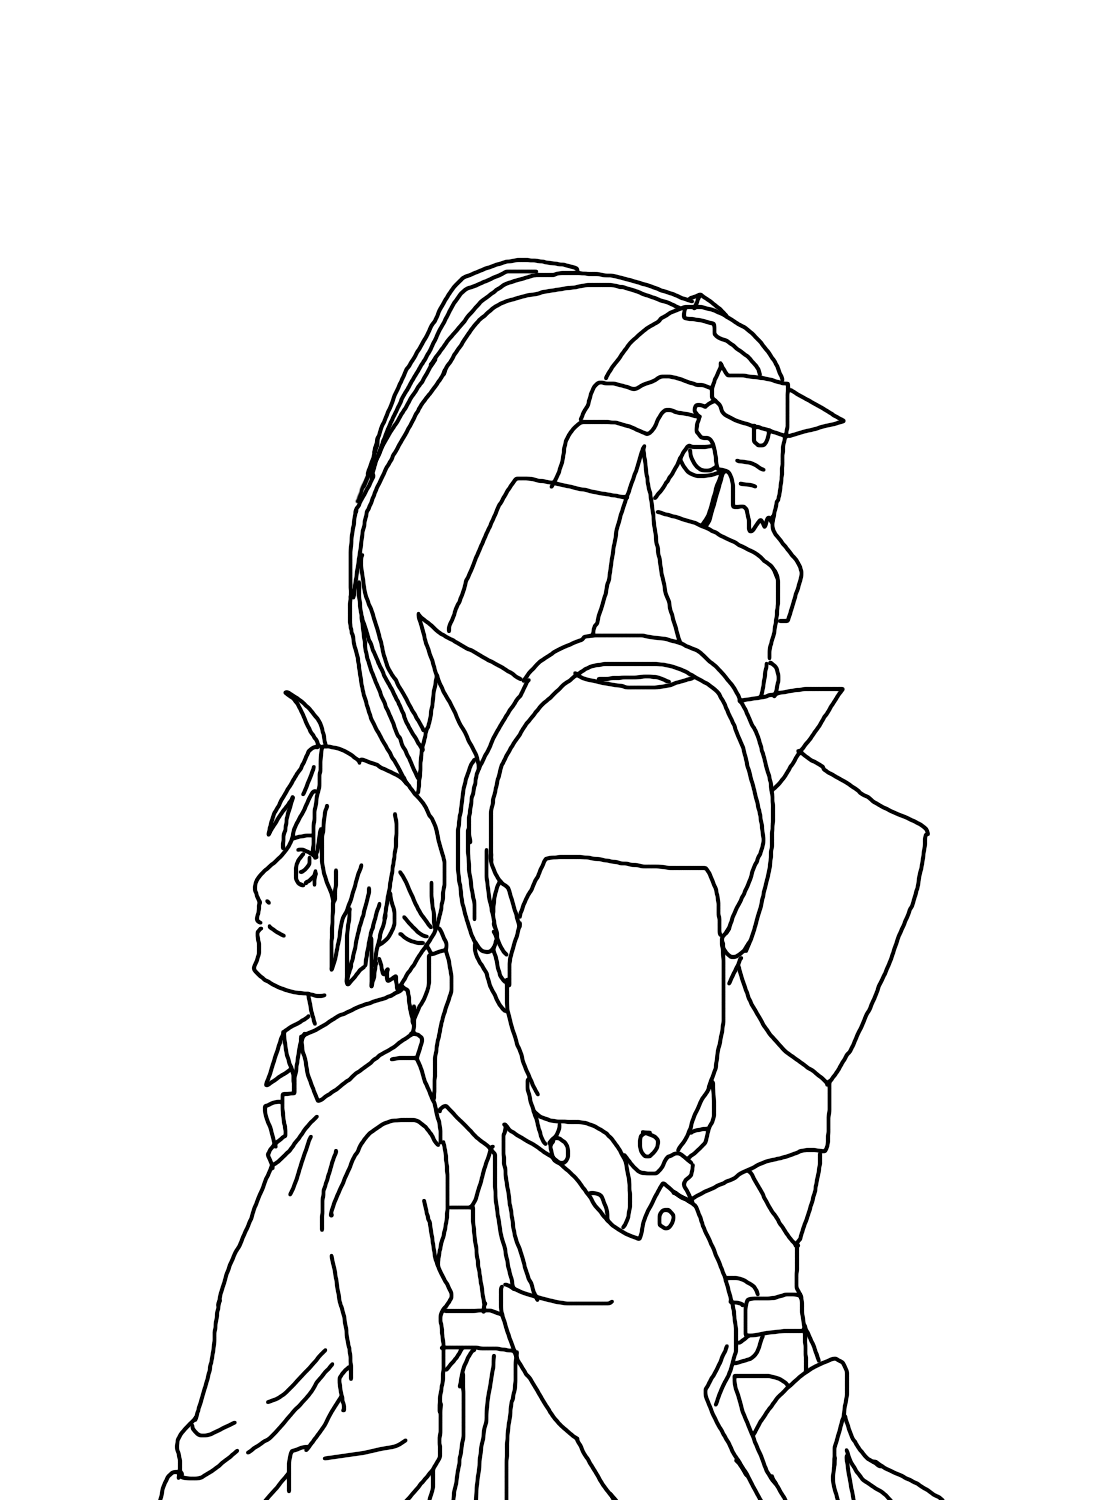 Alphonse with Edward Coloring Page from Alphonse Elric